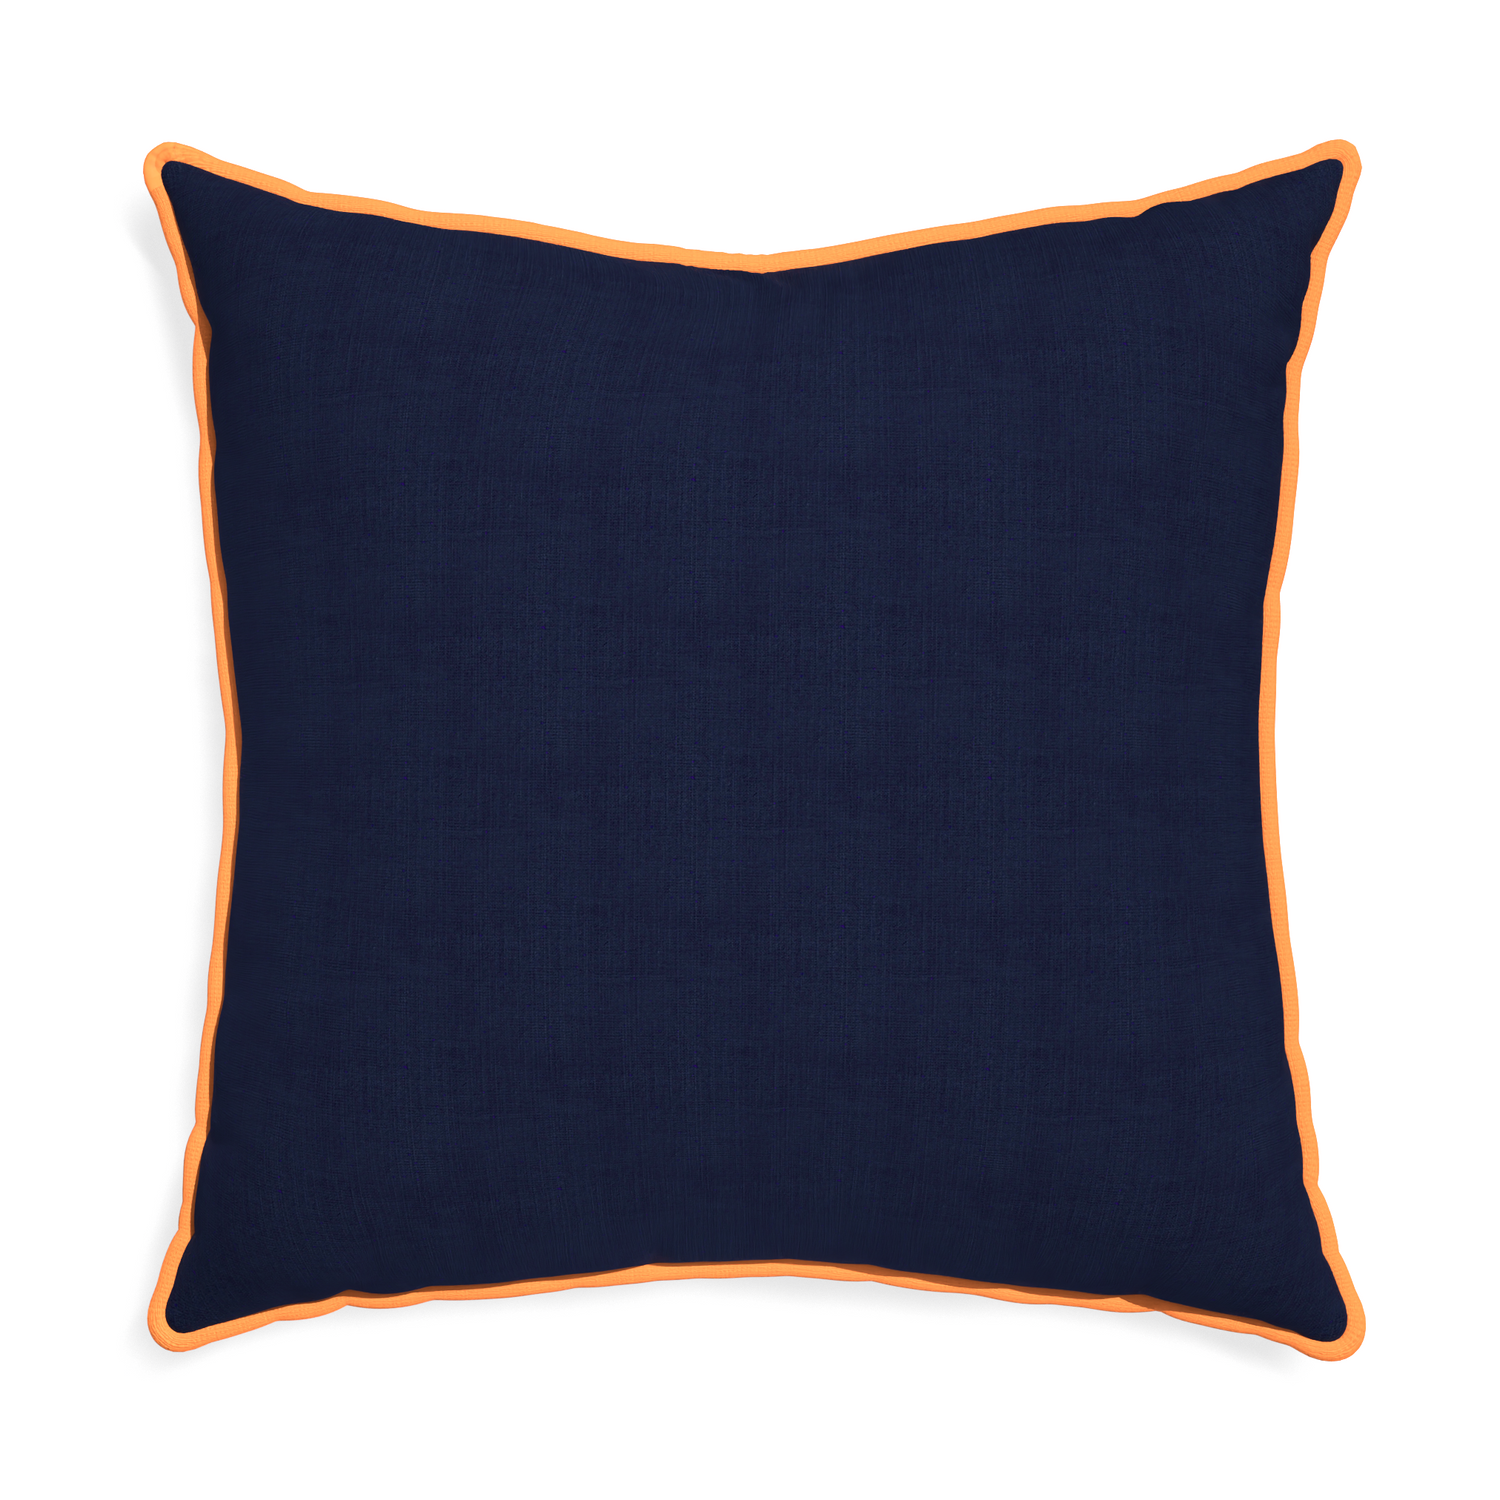 Euro-sham midnight custom pillow with clementine piping on white background